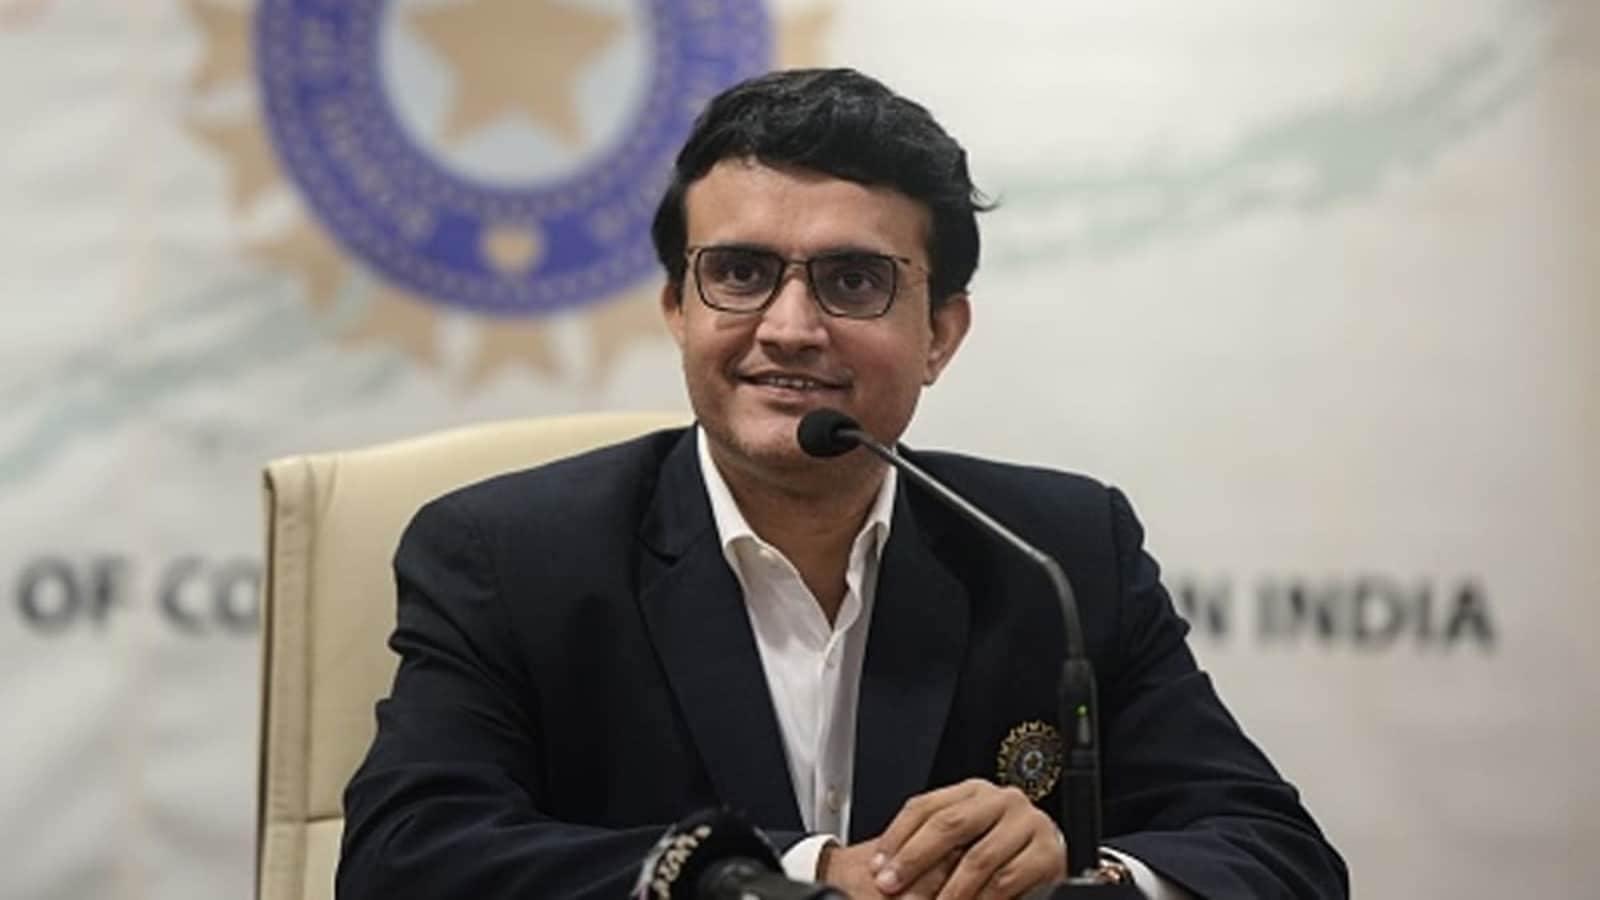 Manchester United-East Bengal Deal: Premier League giants United could become INVESTOR in East Bengal, Sourav Ganguly FACILITATING Potential deal - Check details